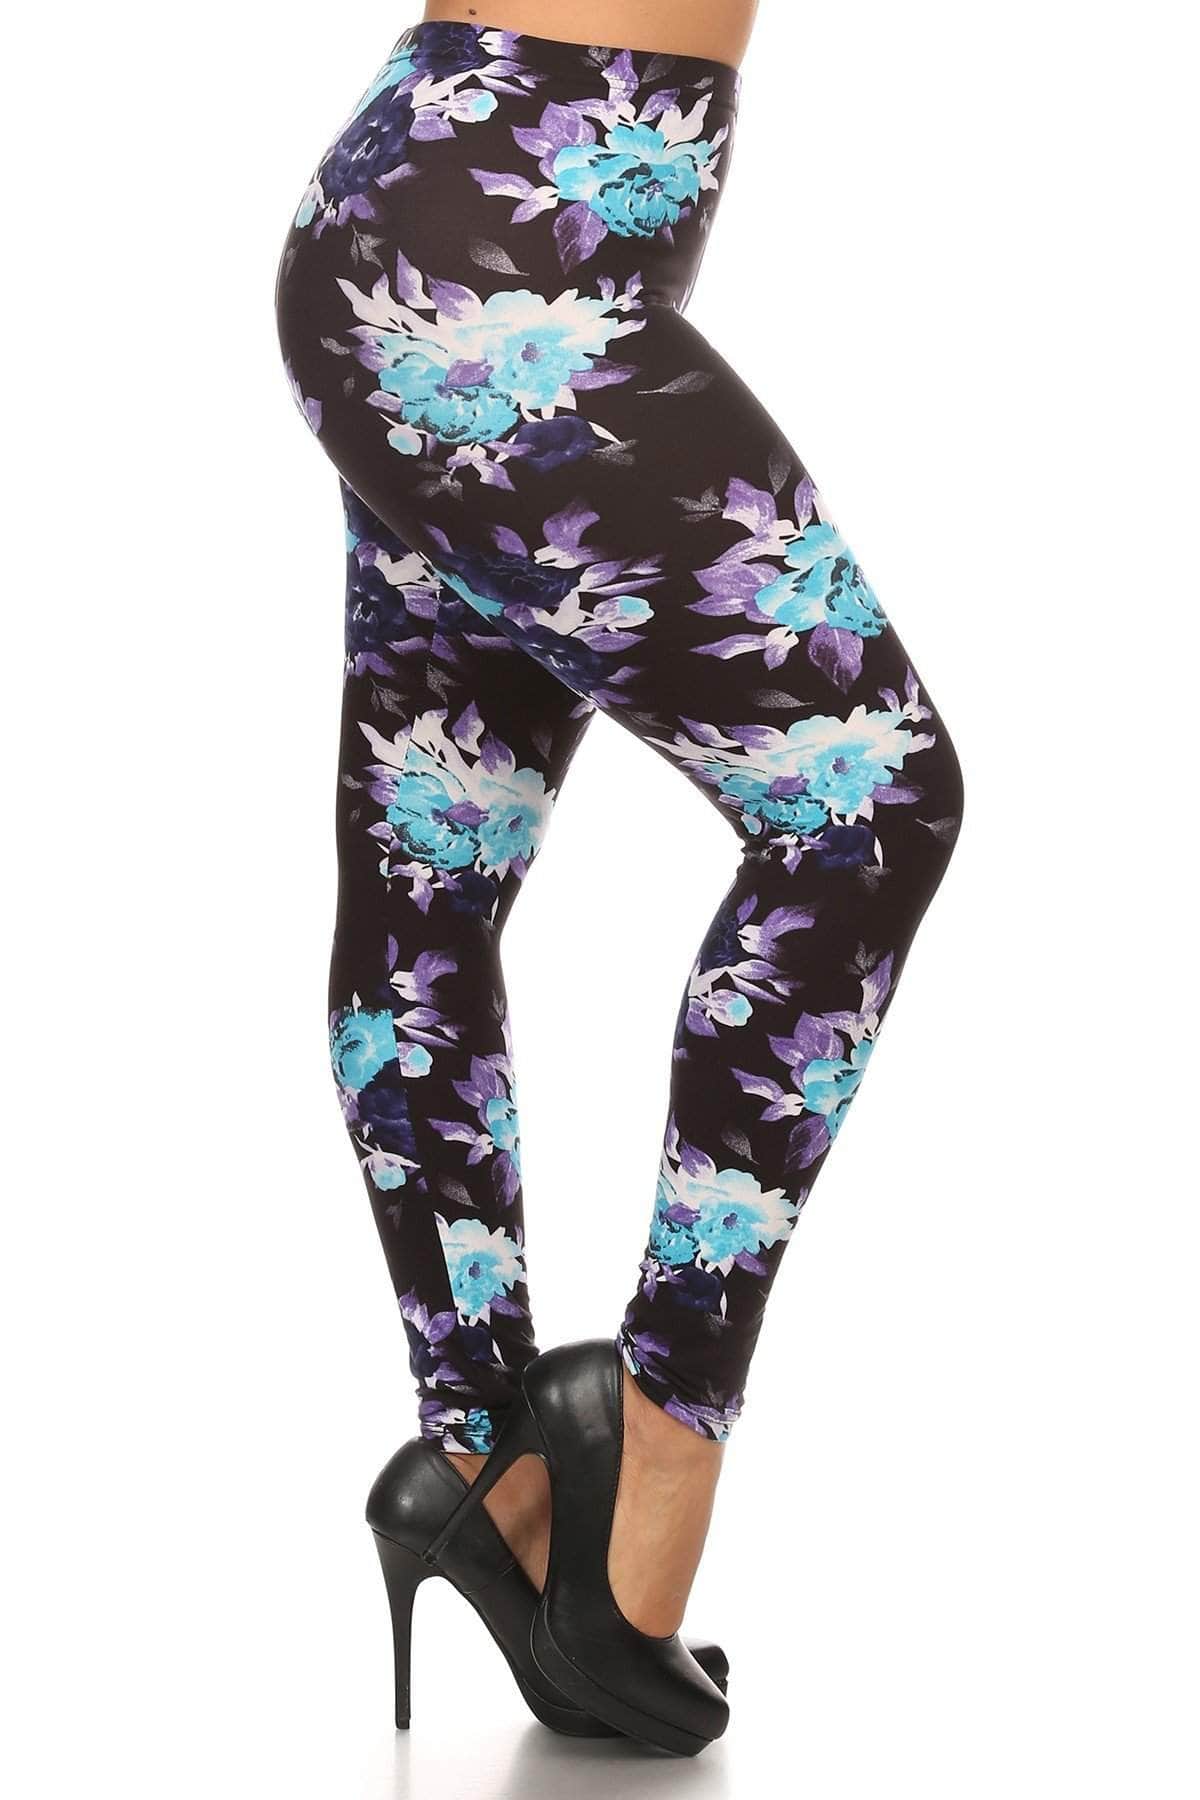 Plus Size Floral Print, Full Length Leggings In A Slim Fitting Style With A Banded High Waist-LEGGINGS-[Adult]-[Female]-Multi-Multi-Blue Zone Planet